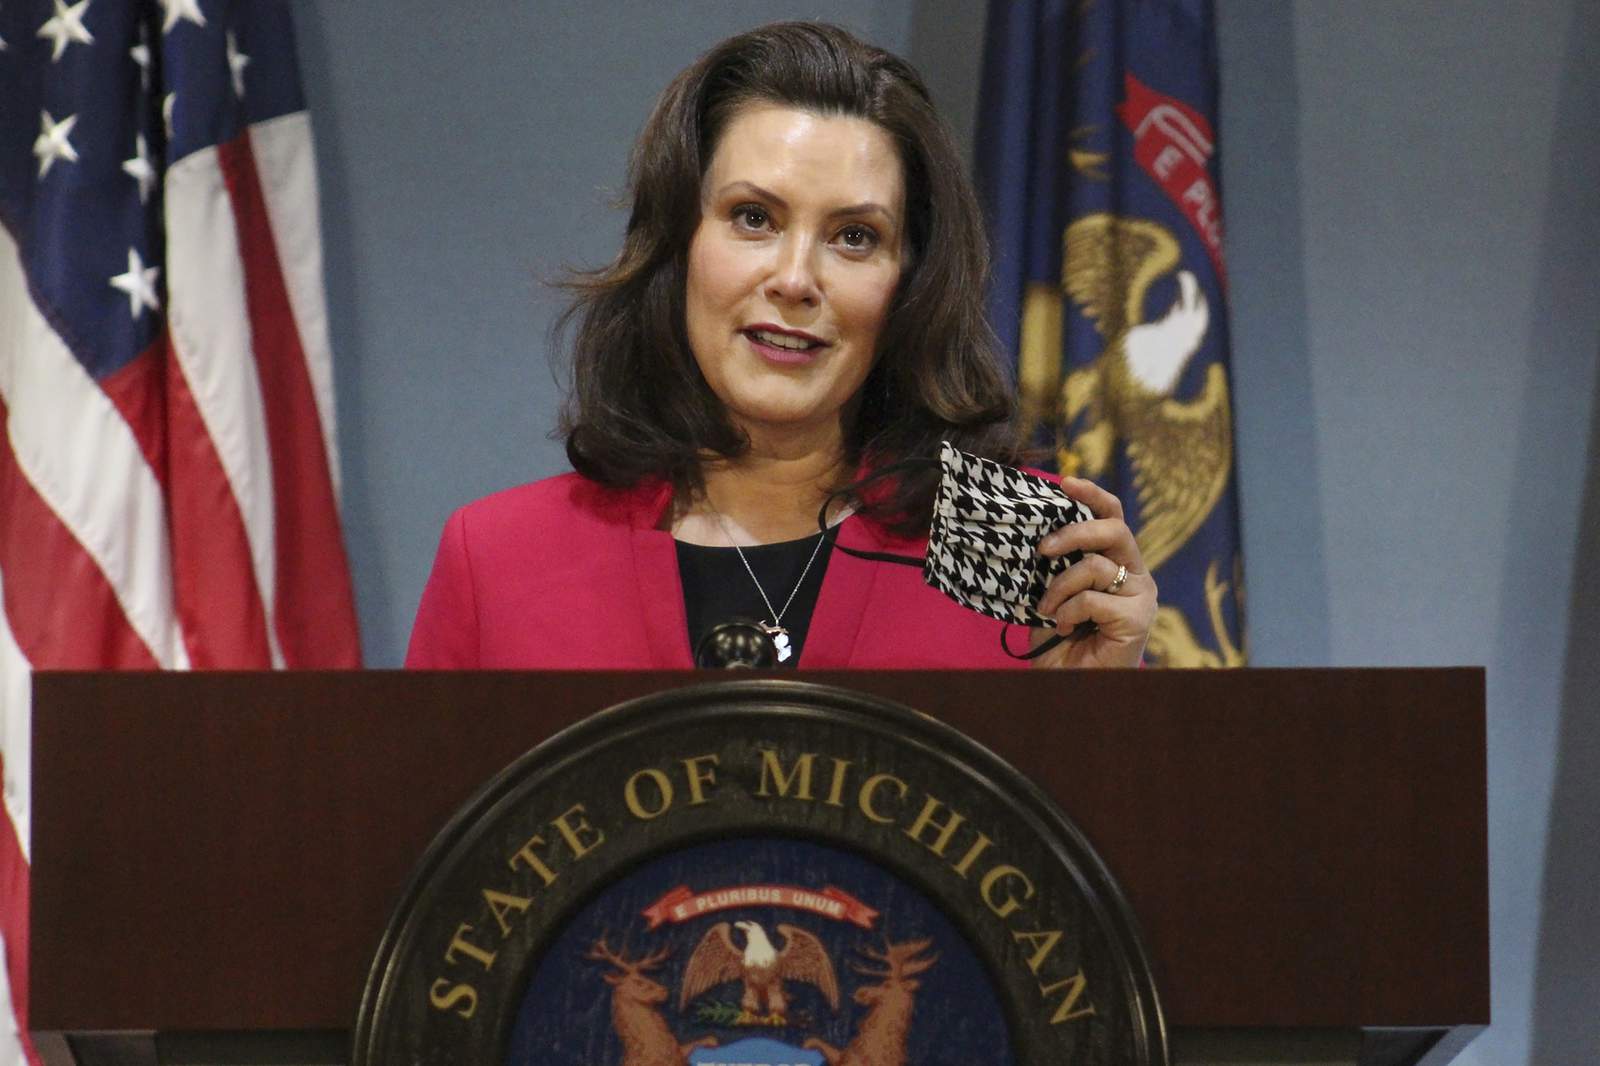 Michigan Gov. Whitmer says husband’s attempt to move up boat queue was just a bad joke